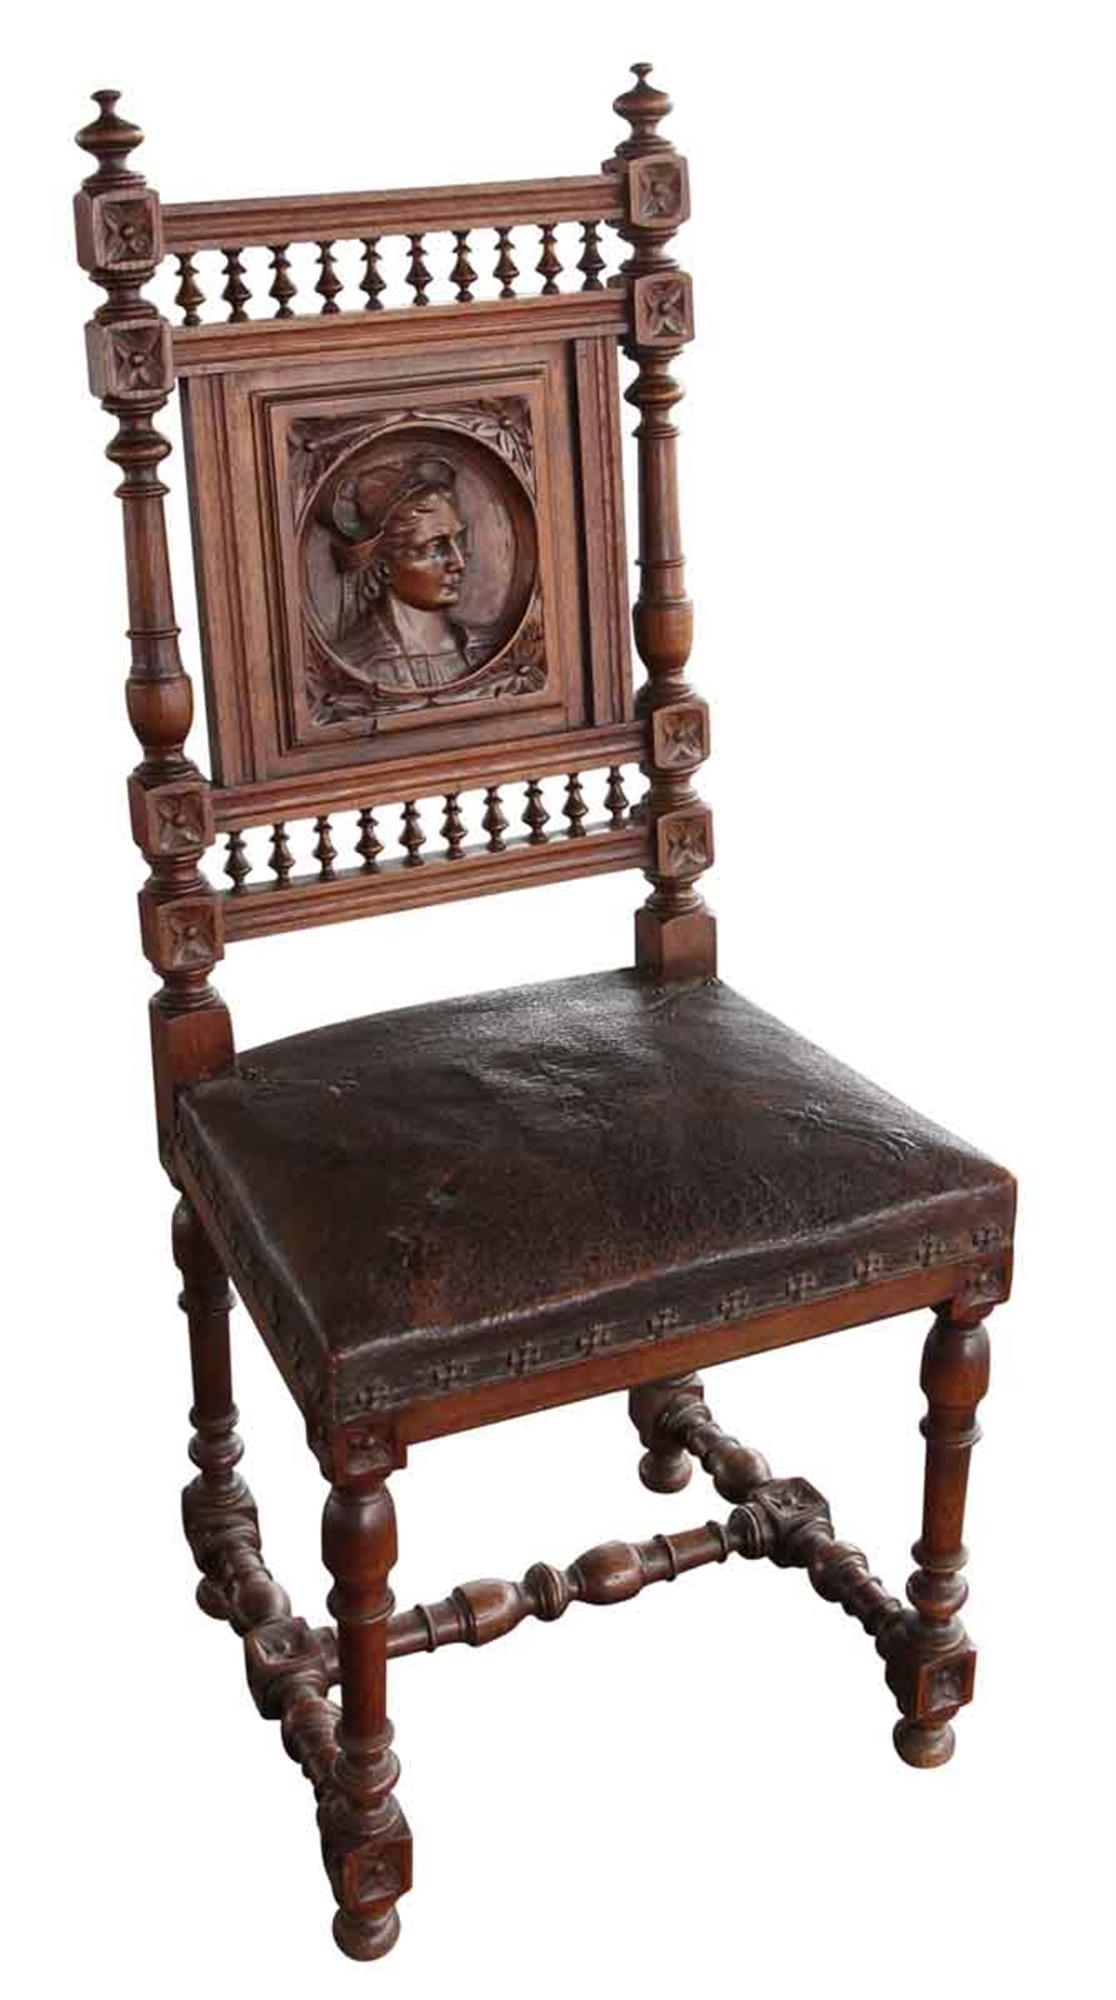 Dark wood tone 1880s English Renaissance style carved chairs with brown leather seats. Each chair back has a different carved face, and every seat cover has the same decorations. The chairs are in excellent condition, but one seat has a rip in the